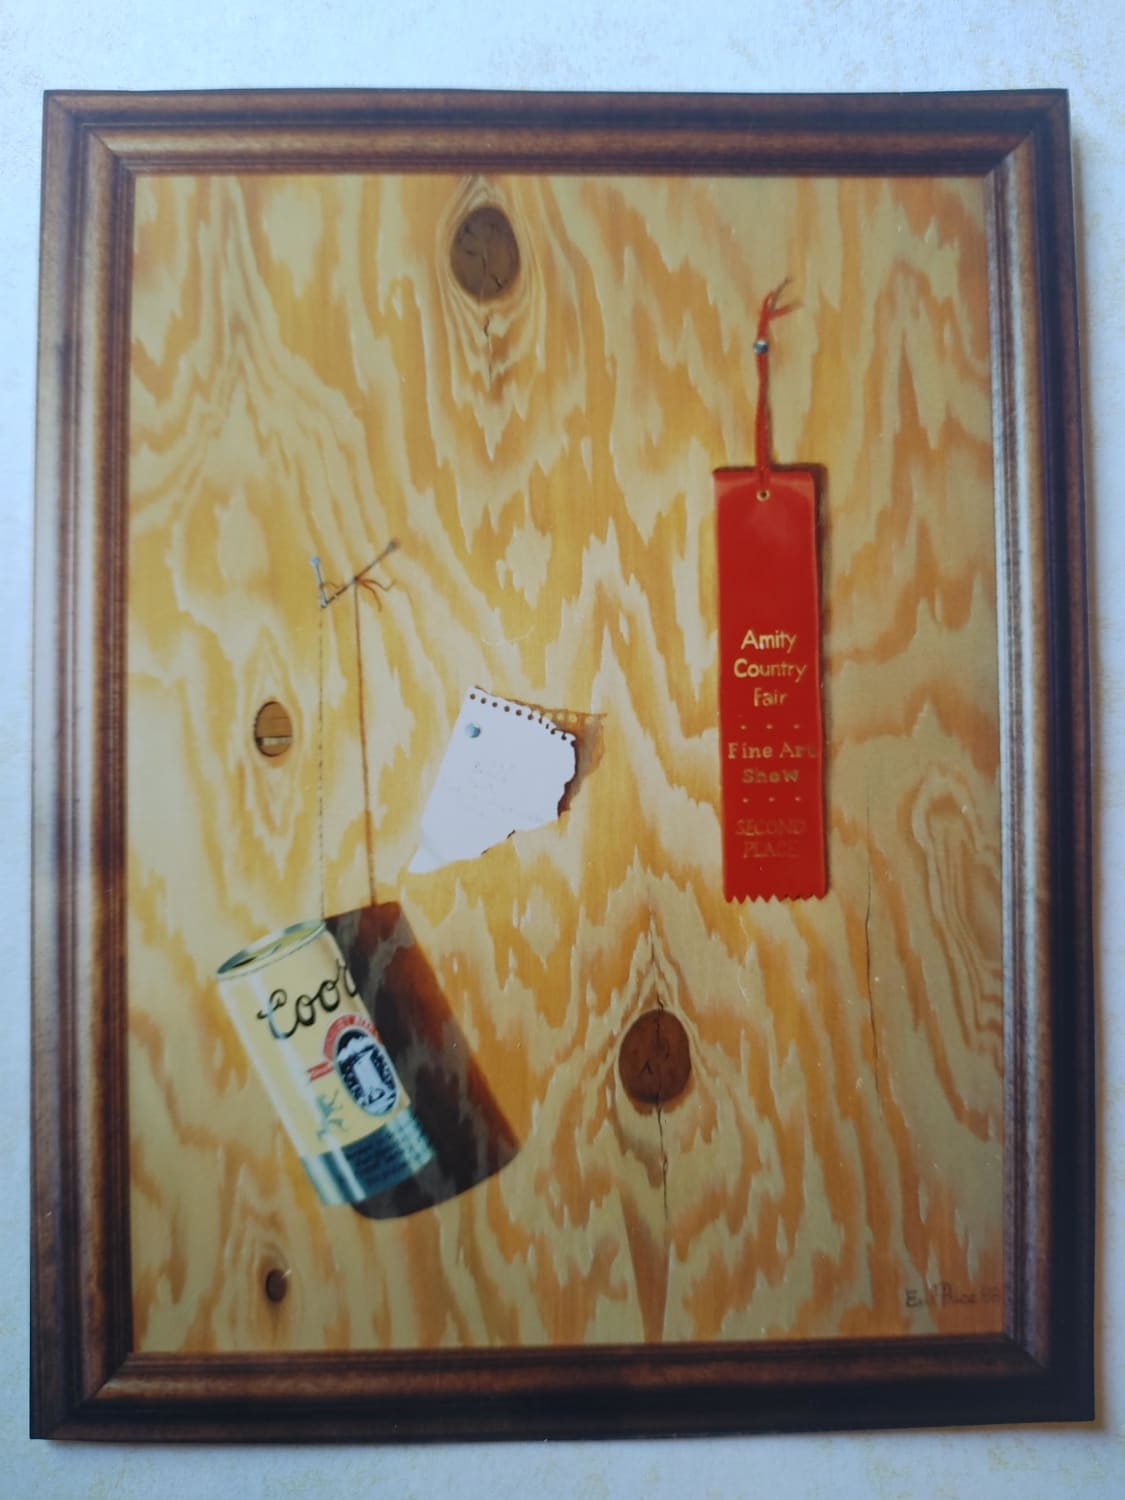 Another oil painting by my dad, everything is painted, including the wood grain.